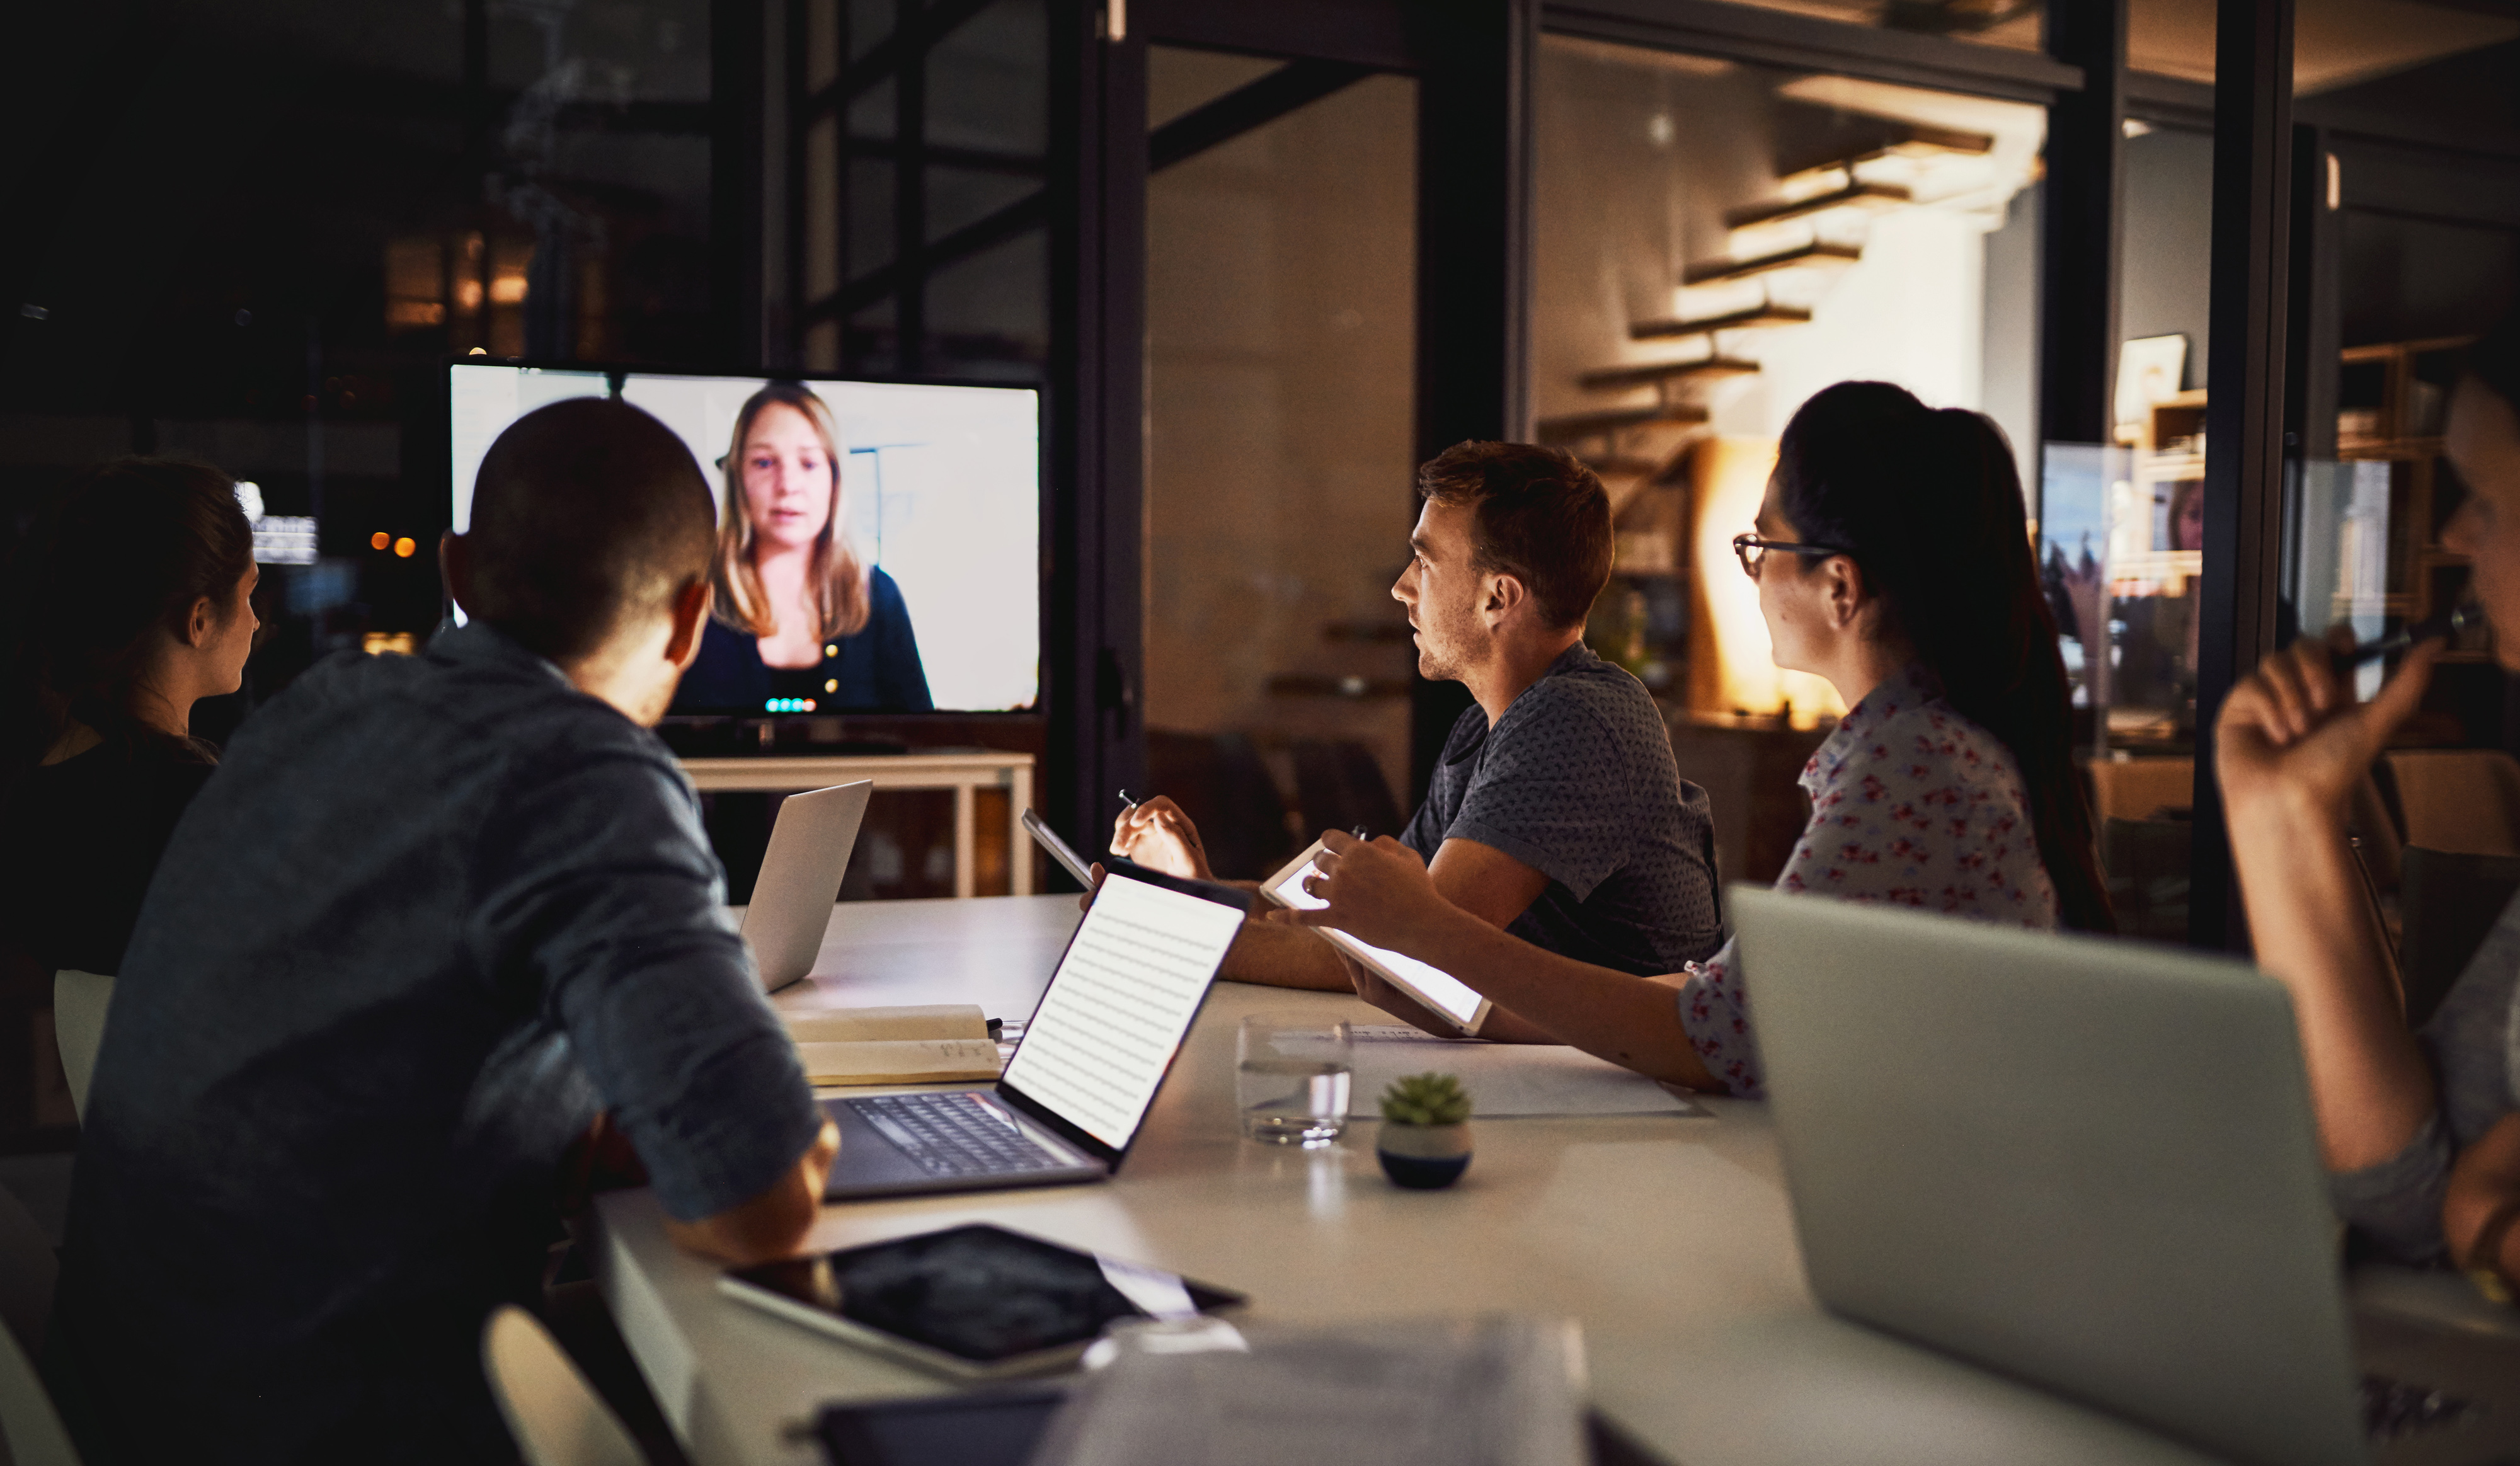 People sitting around conference table with one lady on a video screen